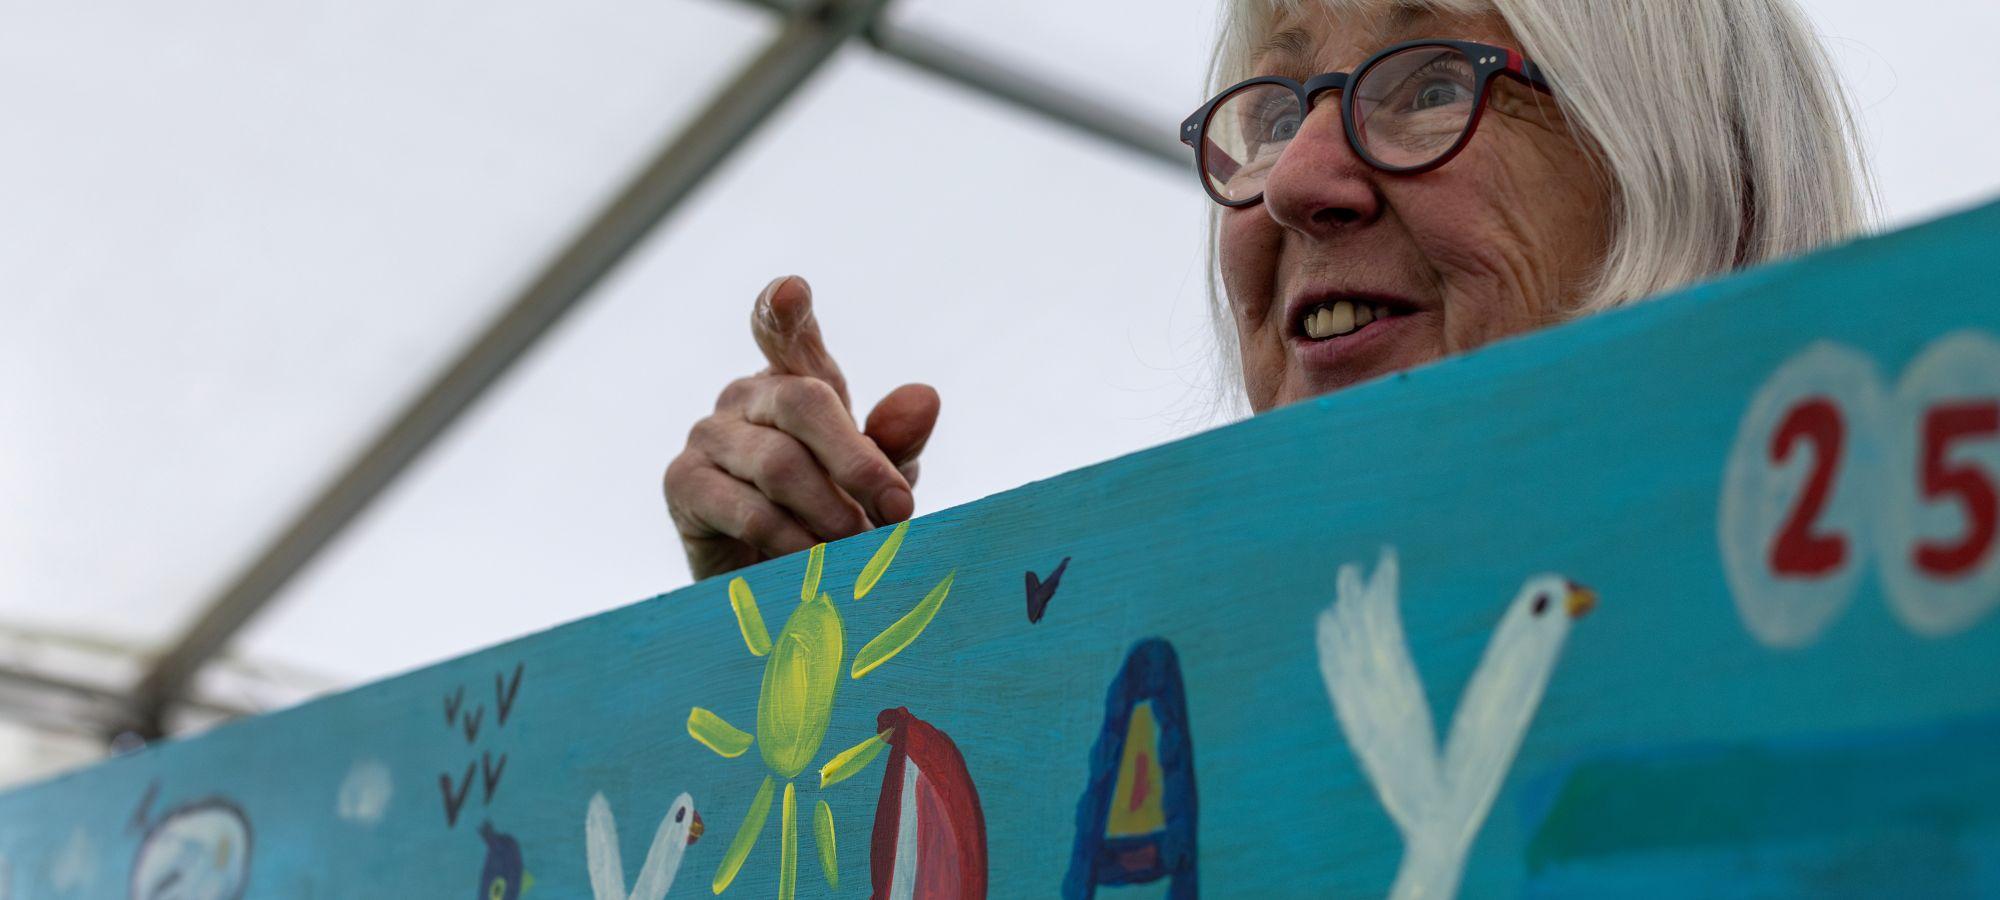 At a children's book event a volunteer holds up an illustrated banner with hand drawn lettering.